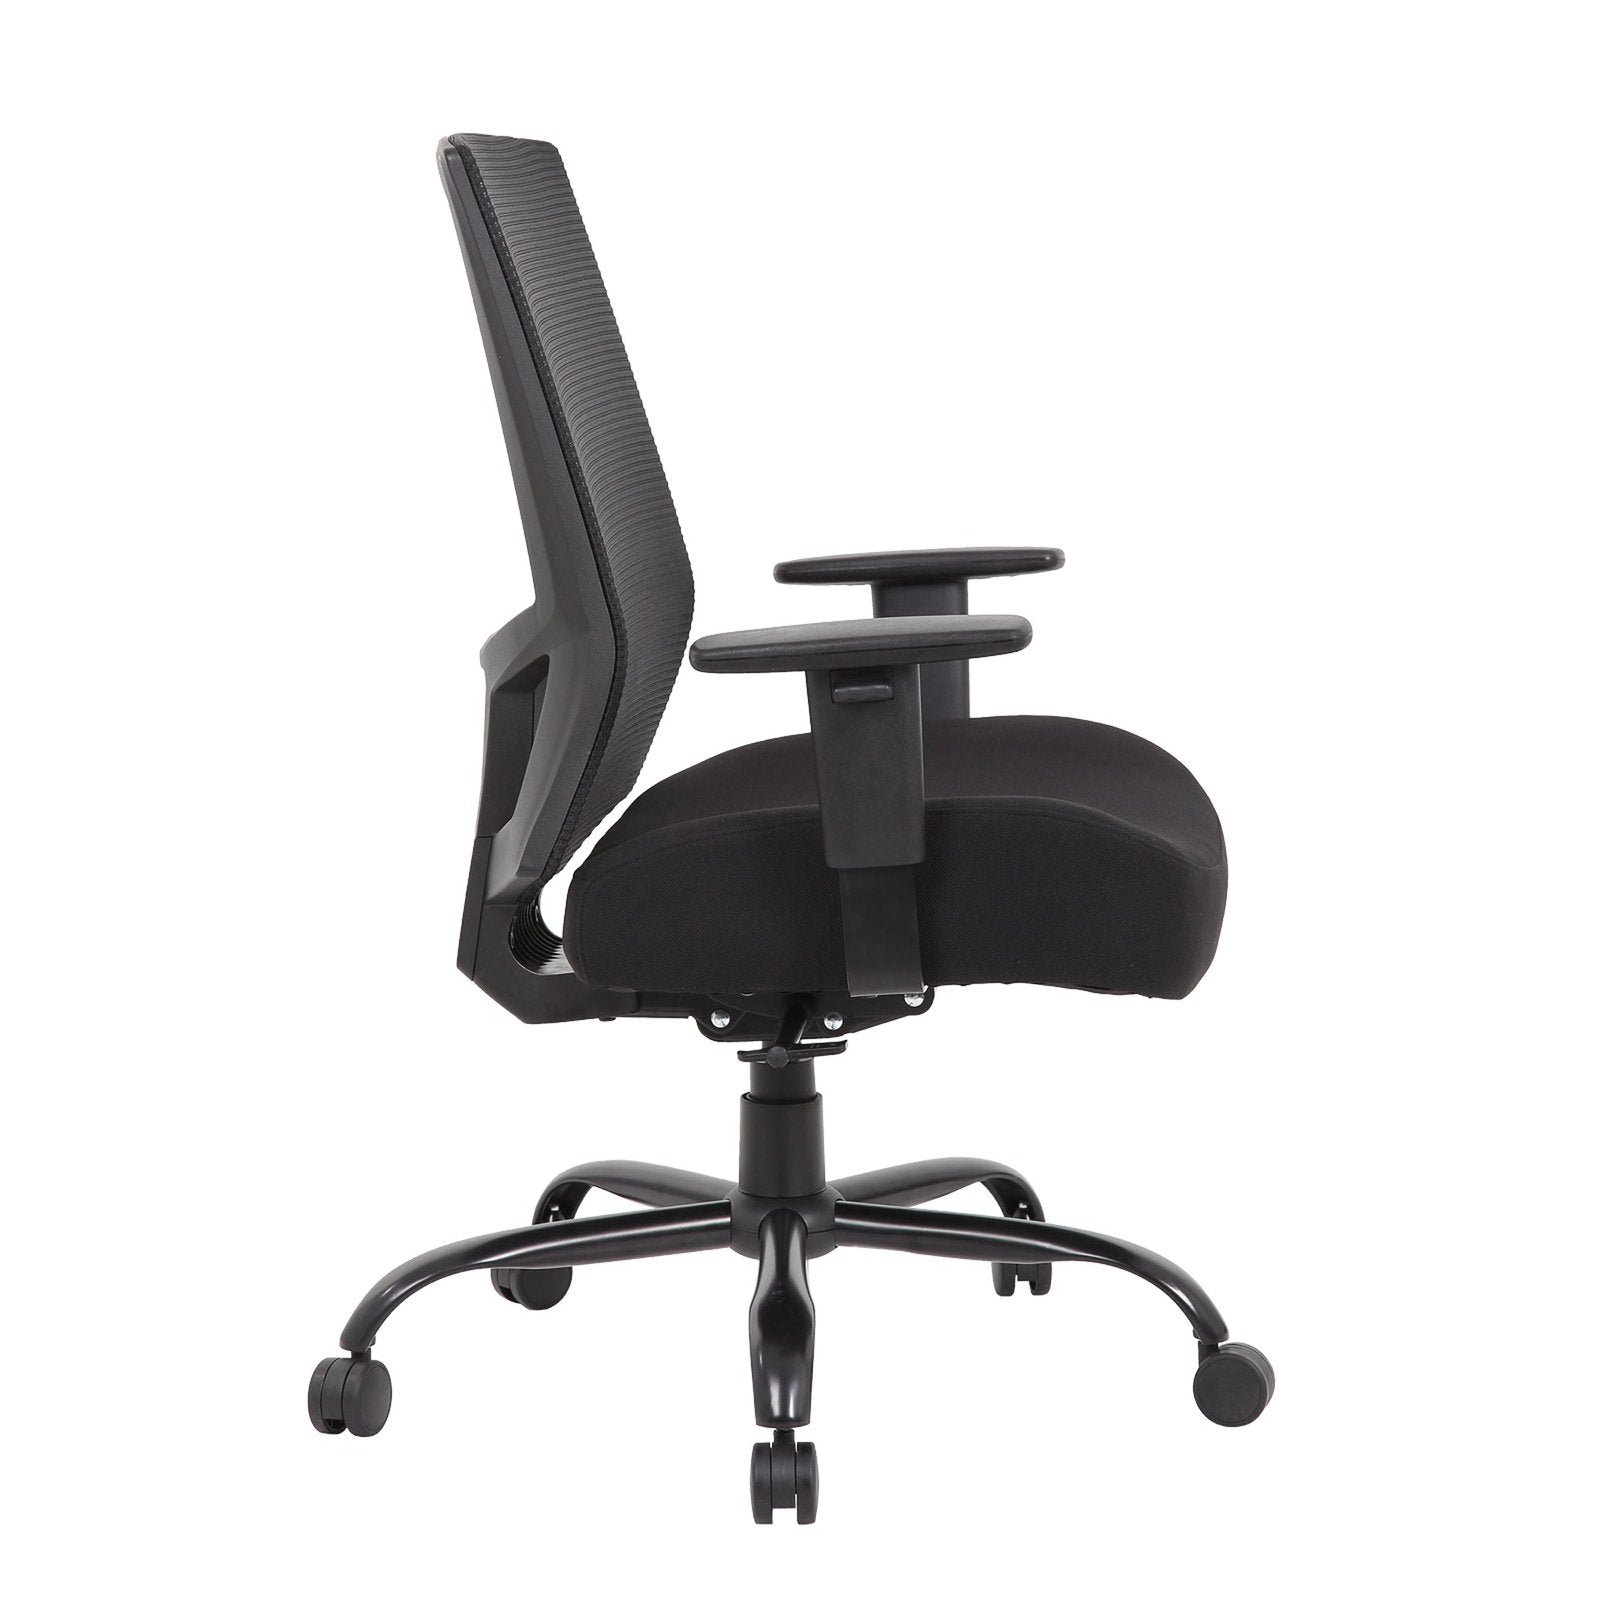 Isla bariatric operator chair with black fabric seat and mesh back - Office Products Online